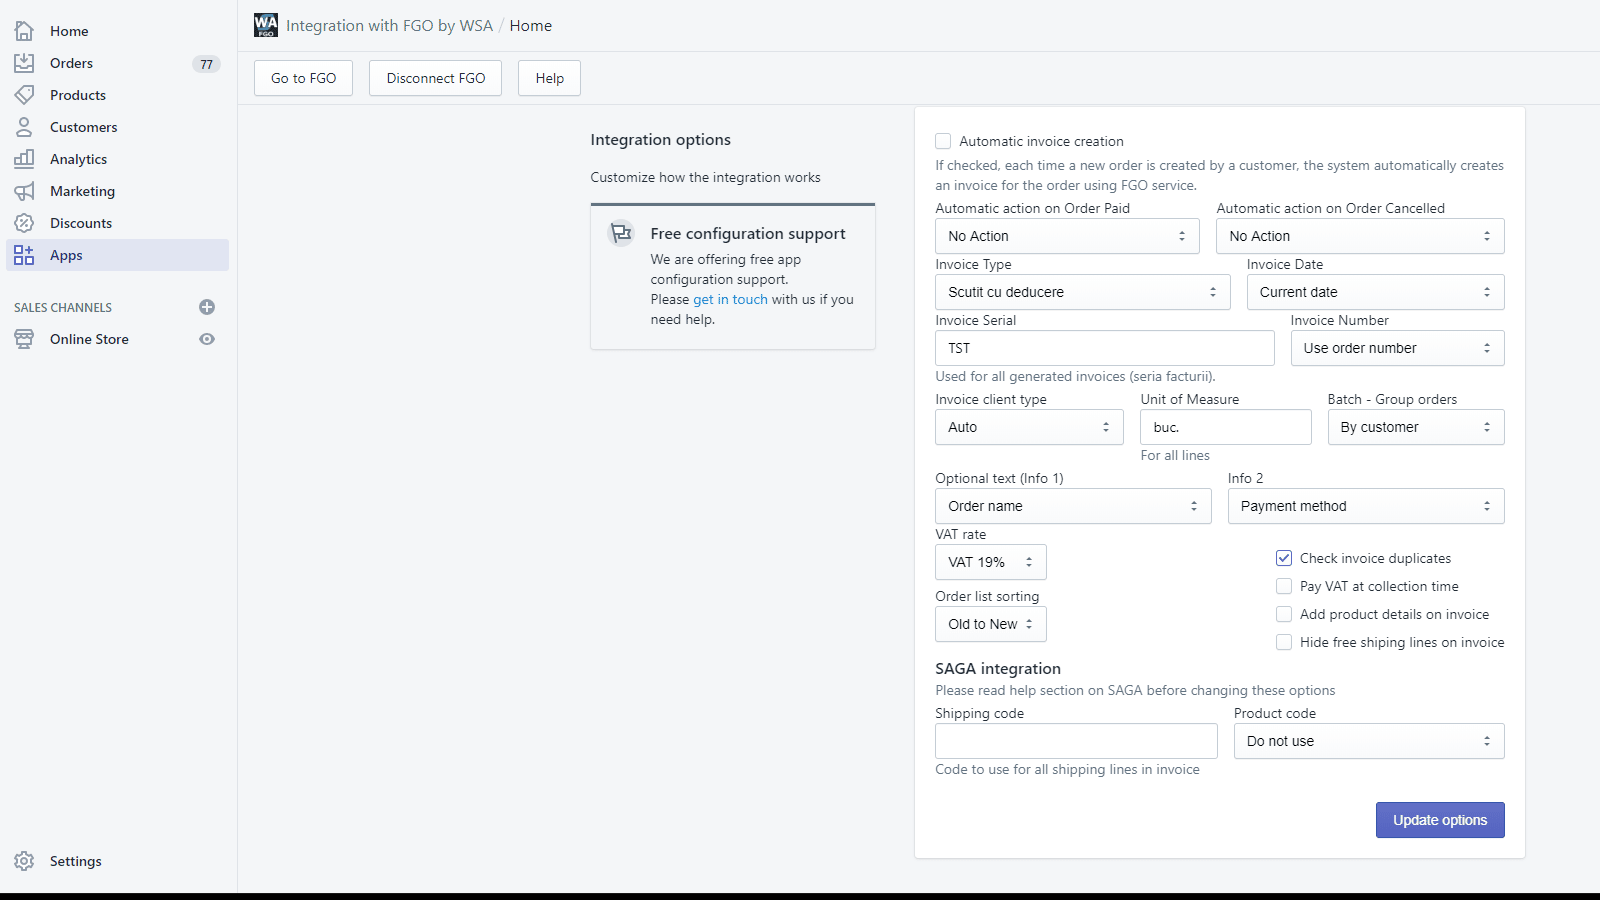 Integration with FGO invoicing